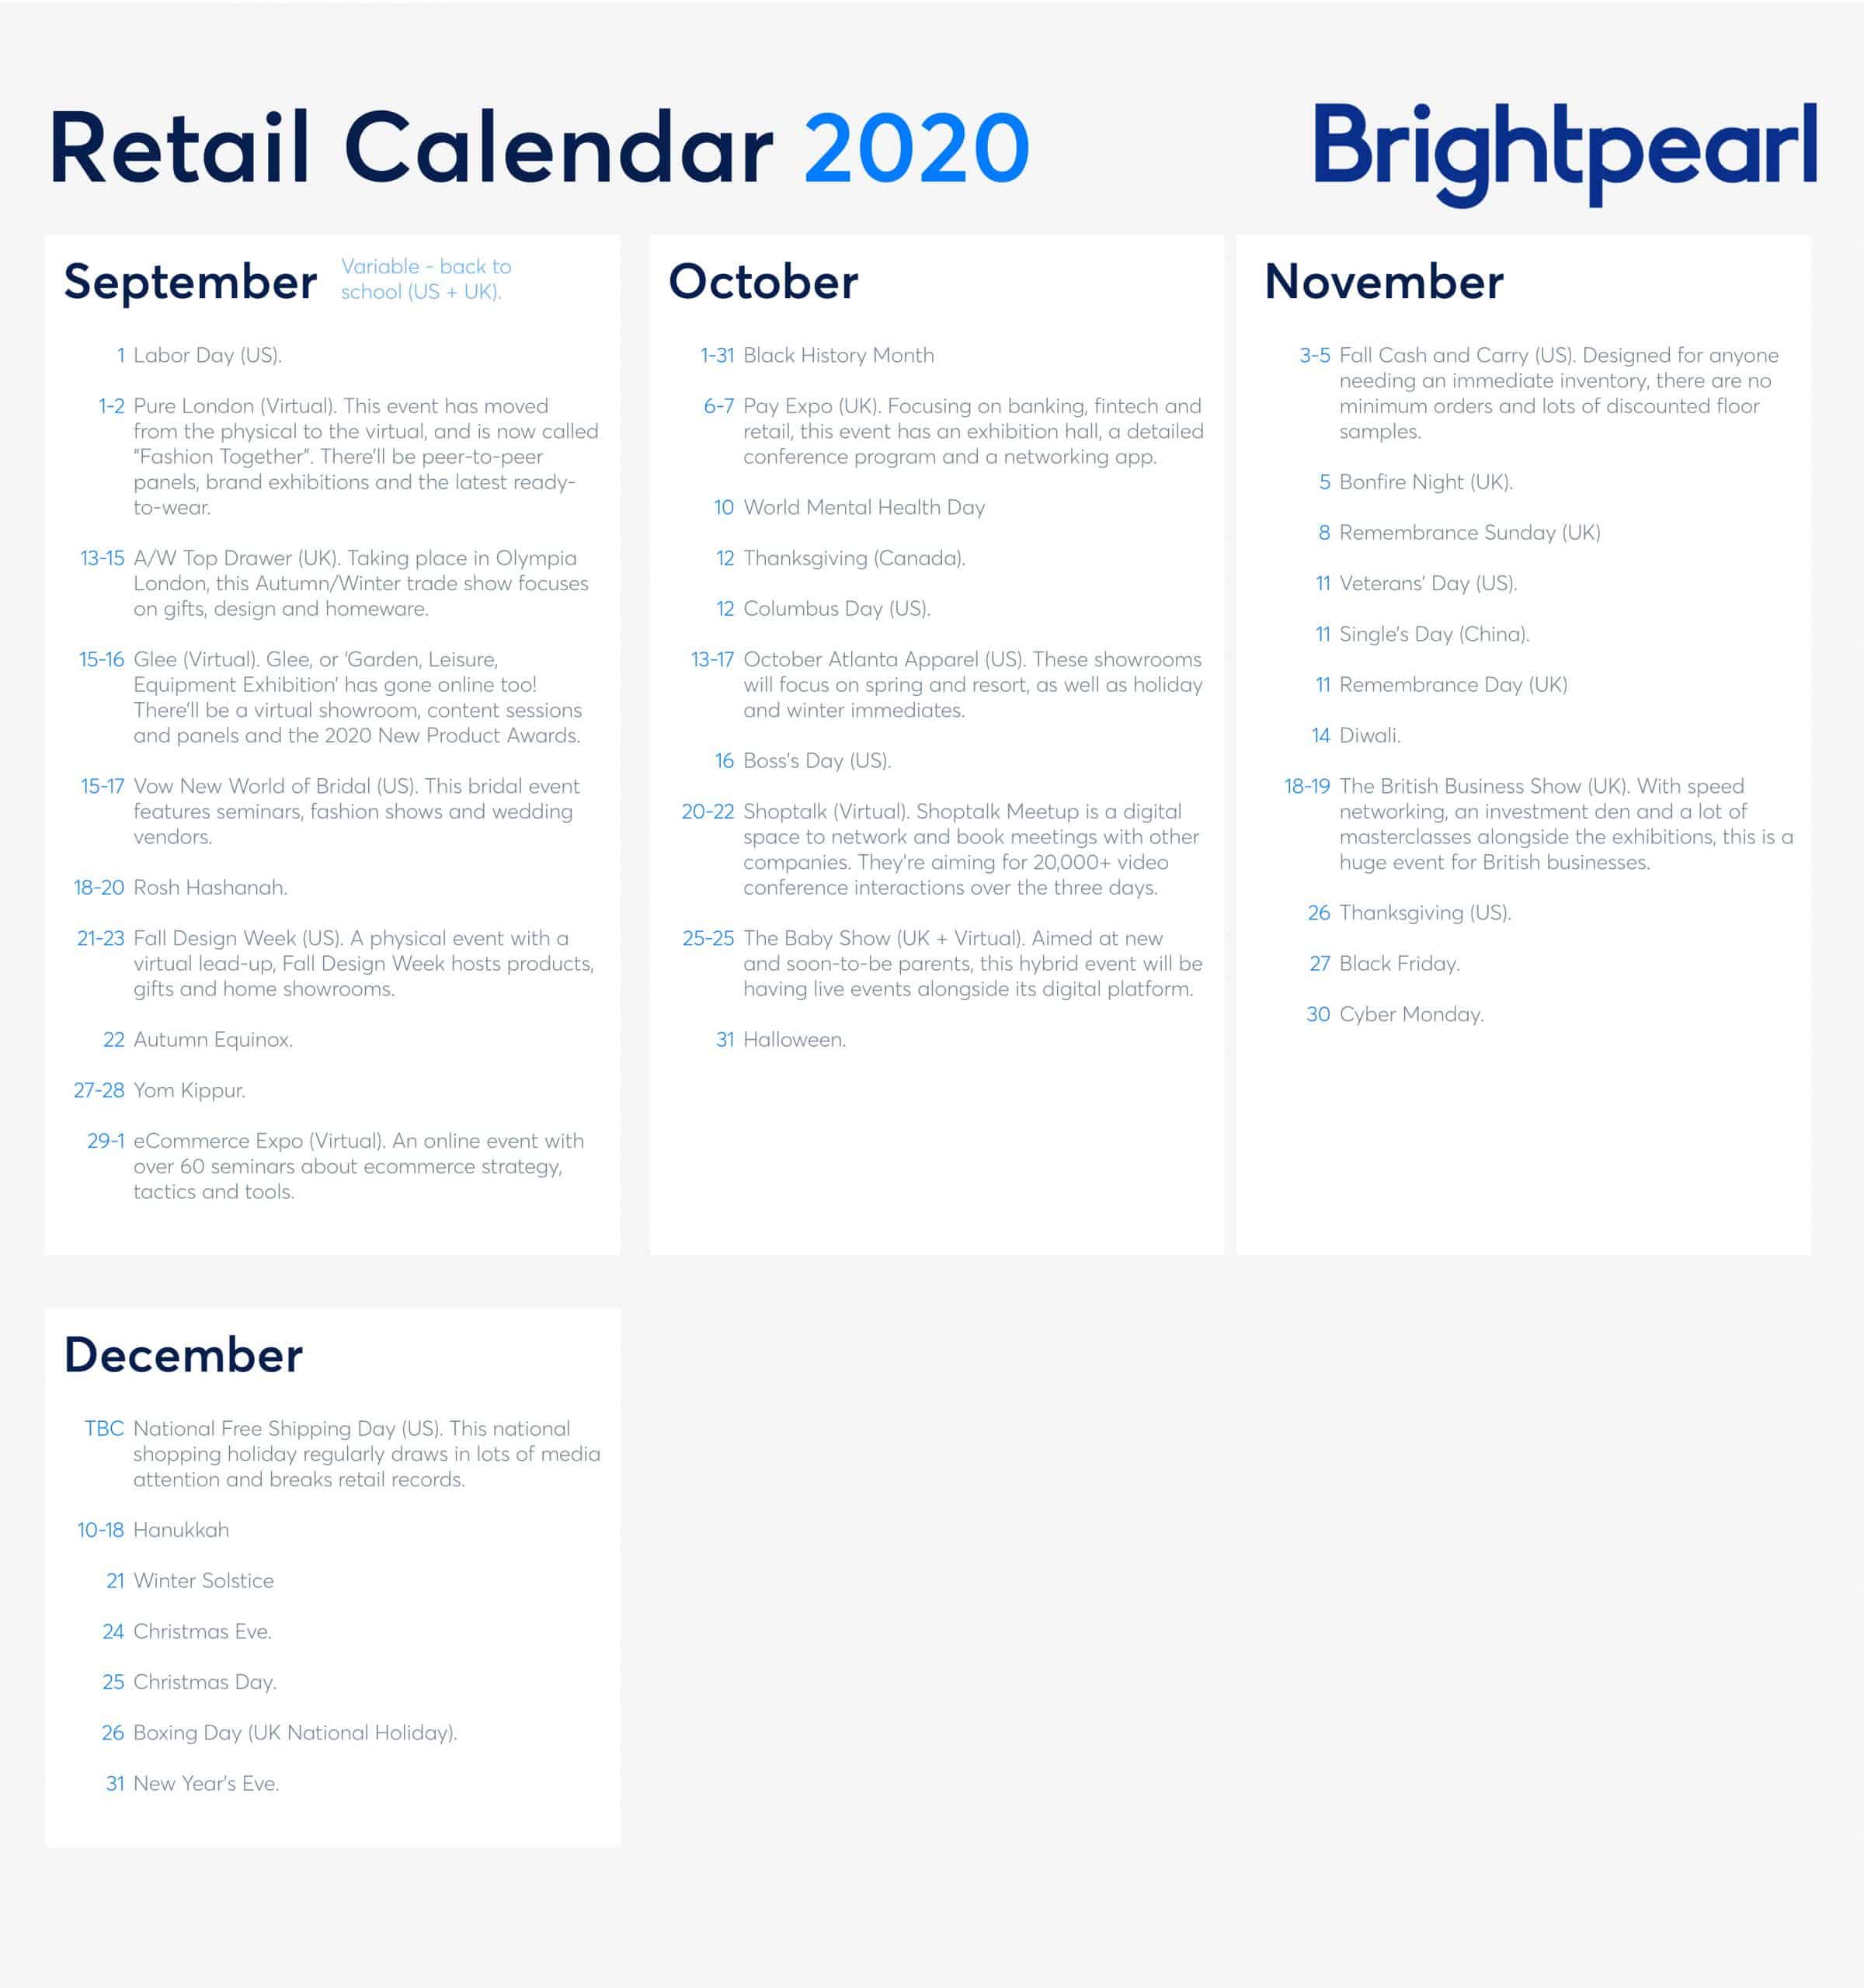 us shopping sales calendar 2021 The 2020 And 2021 Retail Calendar Key Dates You Need To Know About As A Retail Business In 2020 And 2021 Bright Pearl Blog us shopping sales calendar 2021